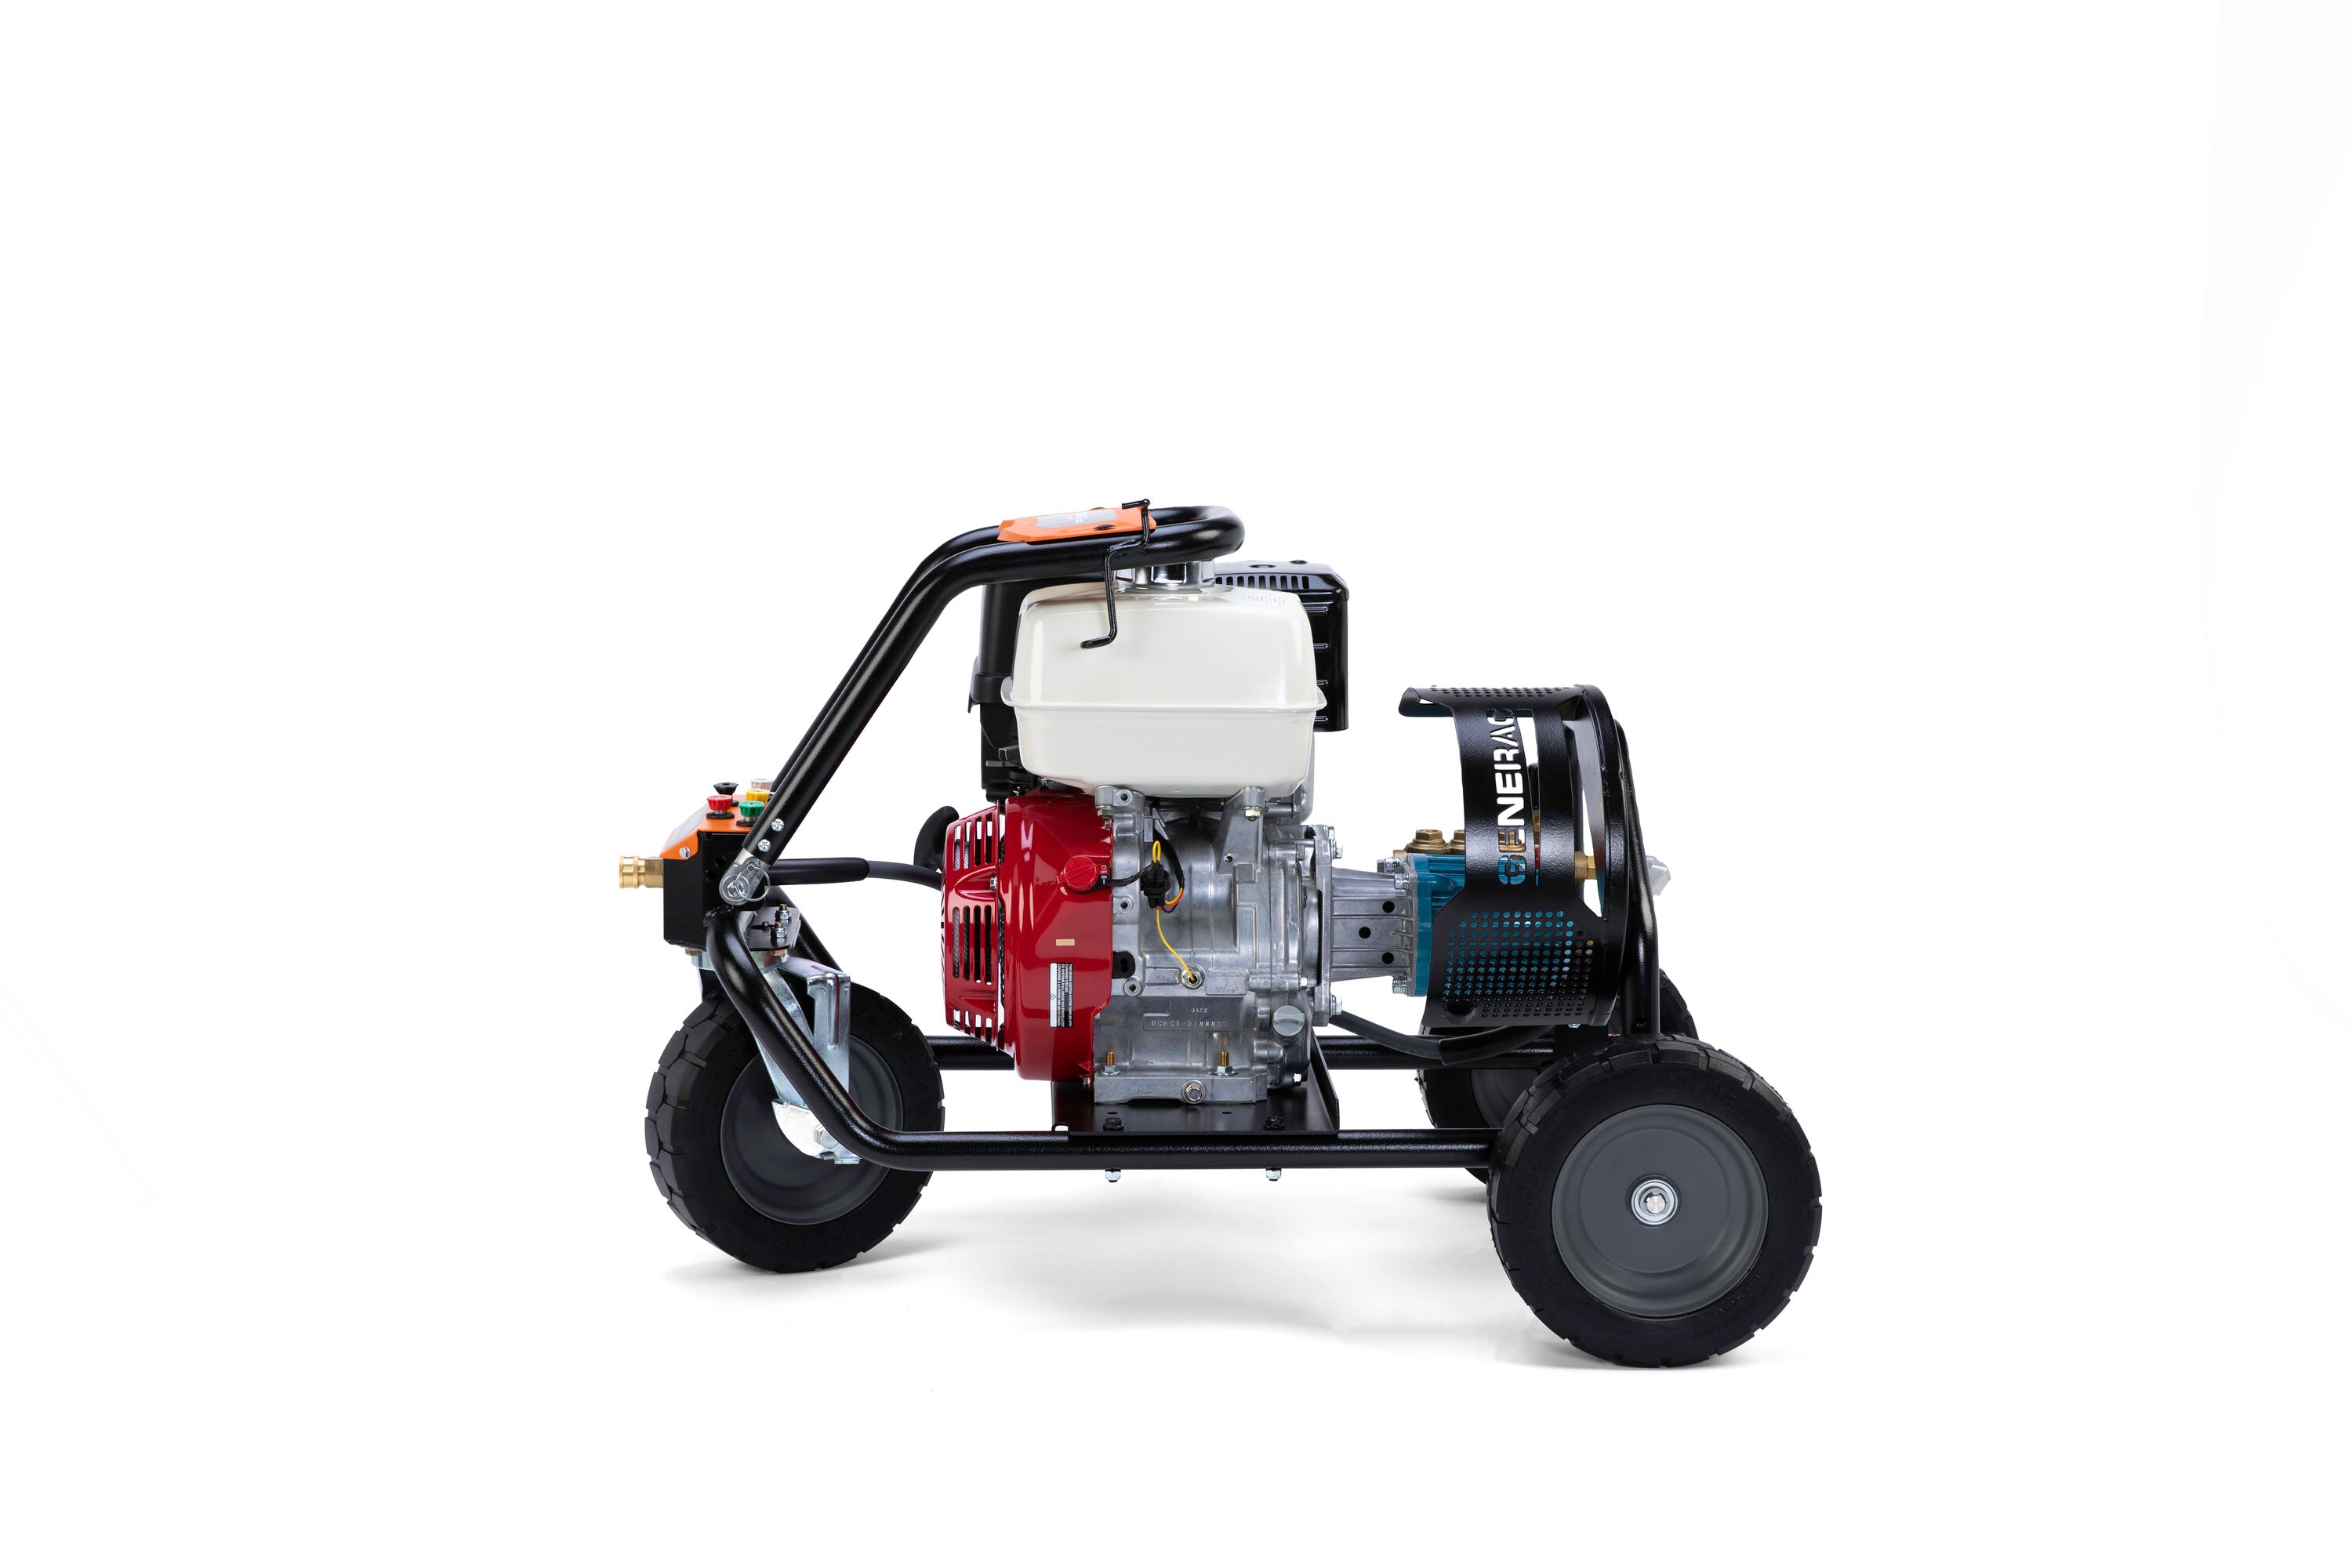 Generac Commercial 4000 PSI 3.5- Gallons-GPM Cold Water Gas Pressure Washer  (CARB)